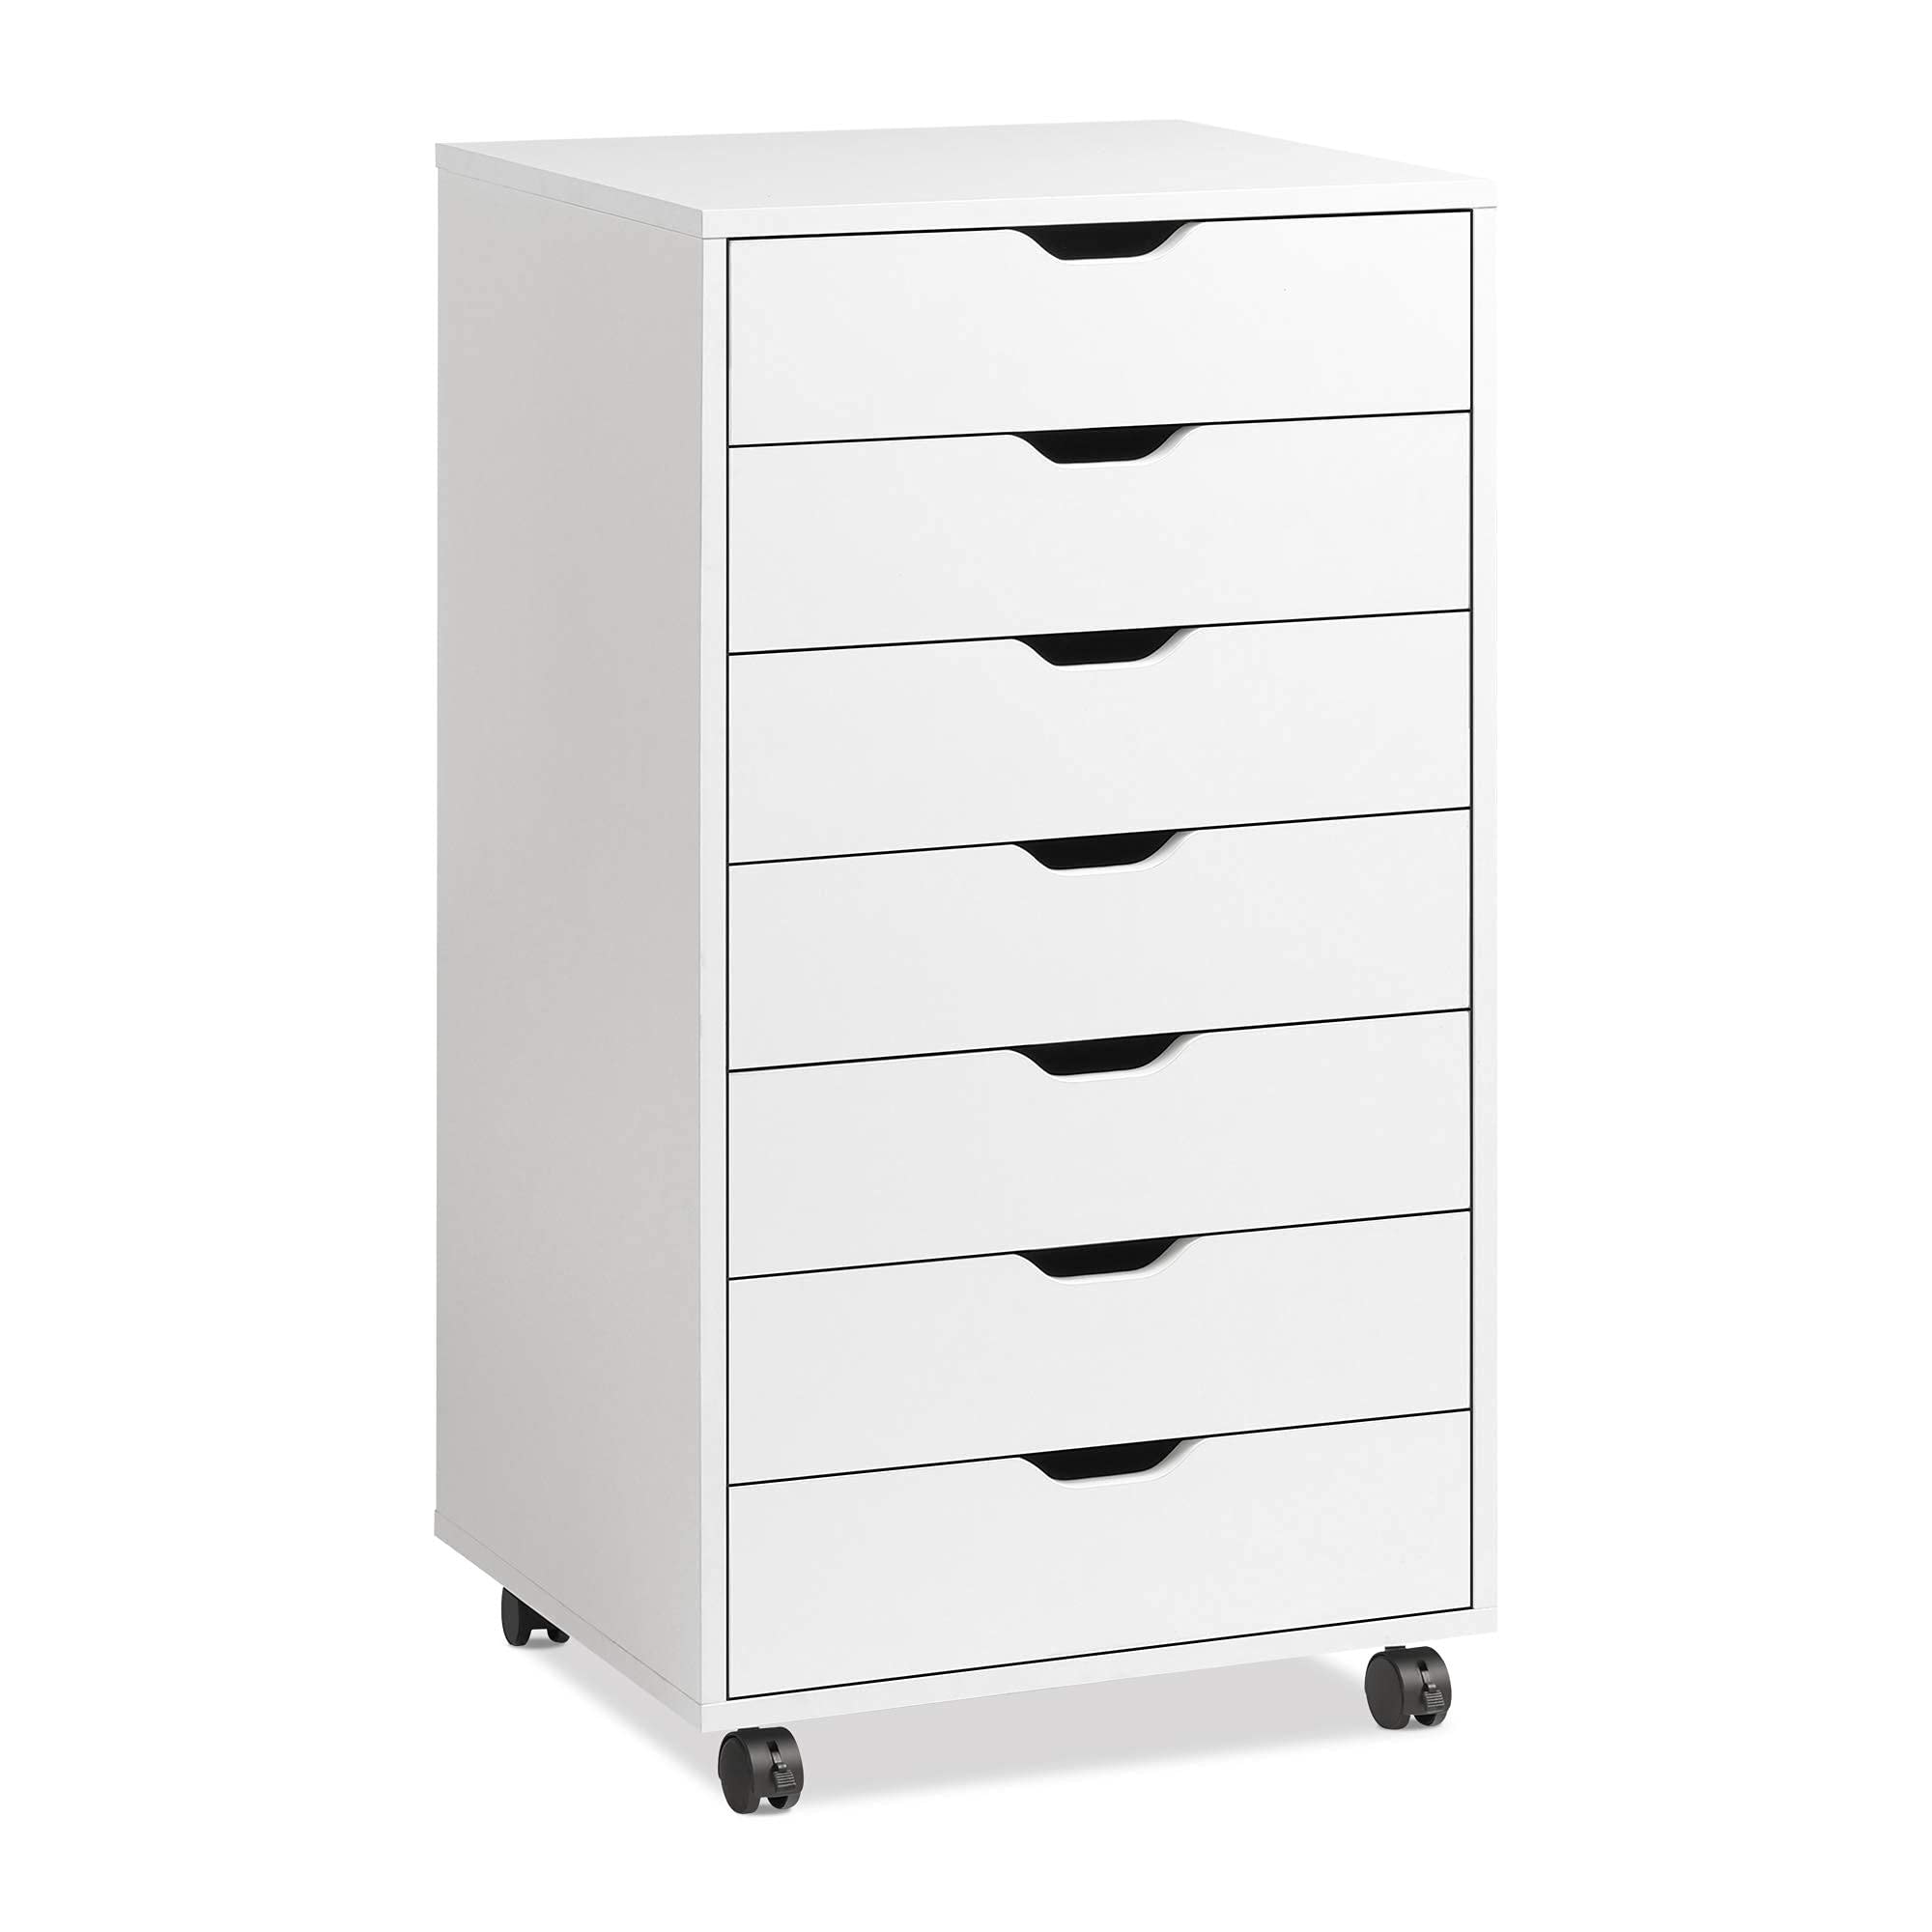 7 Drawer Chest, Mobile File Cabinet with Wheels, Home Office Wood Storage  Dresser Cabinet, Large Craft Storage Organizer - Bed Bath & Beyond -  37668727